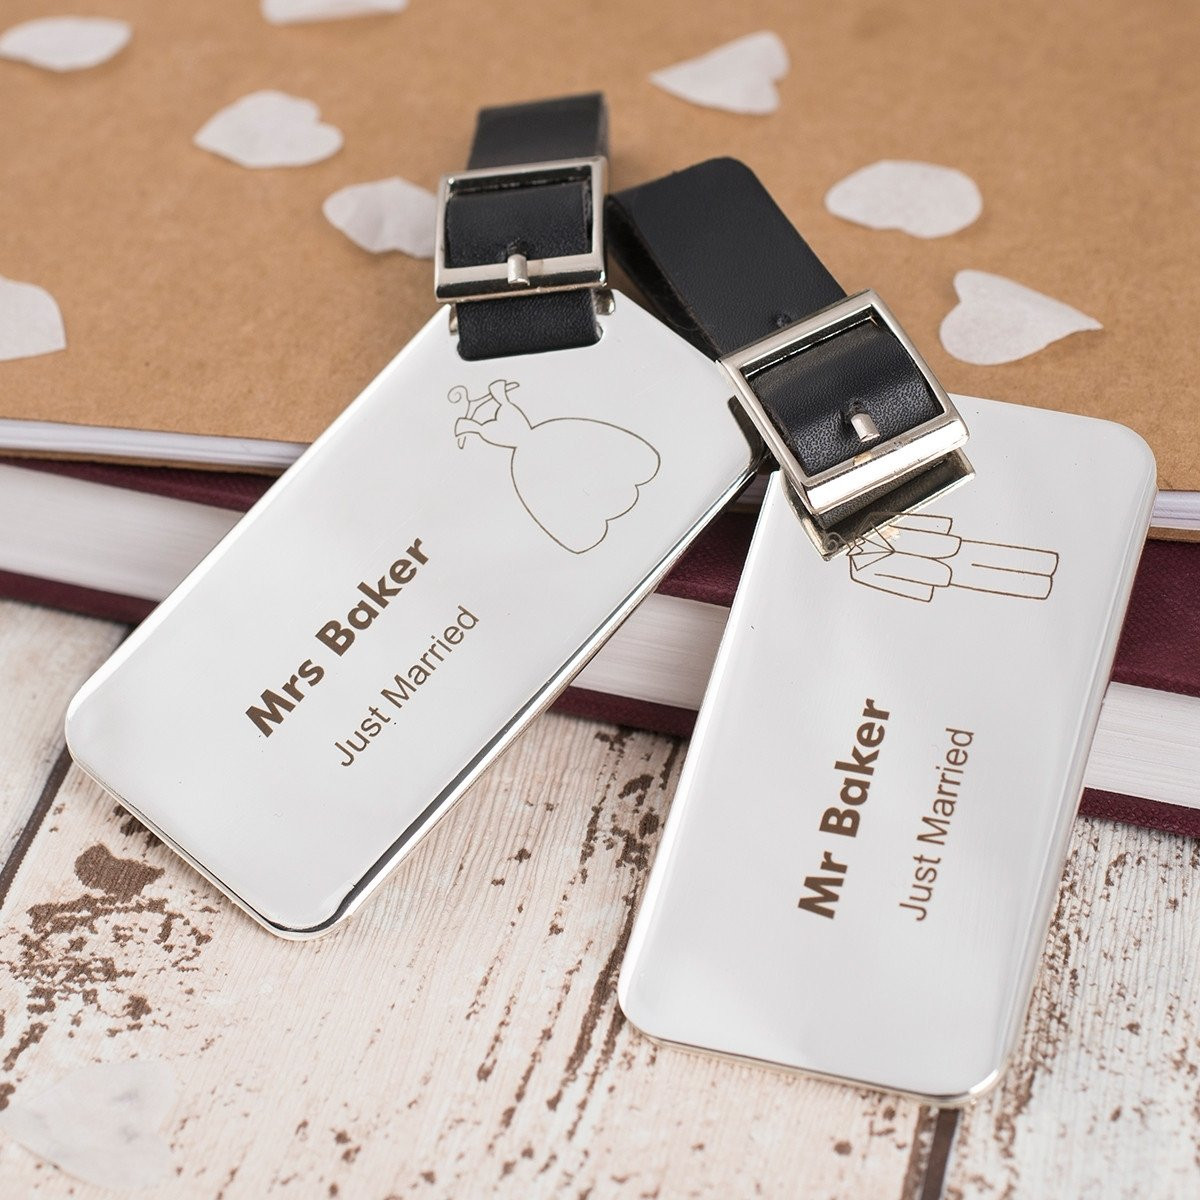 Wedding Gift Ideas For Couple That Has Everything
 10 Trendy Gift Ideas For Couples Who Have Everything 2020